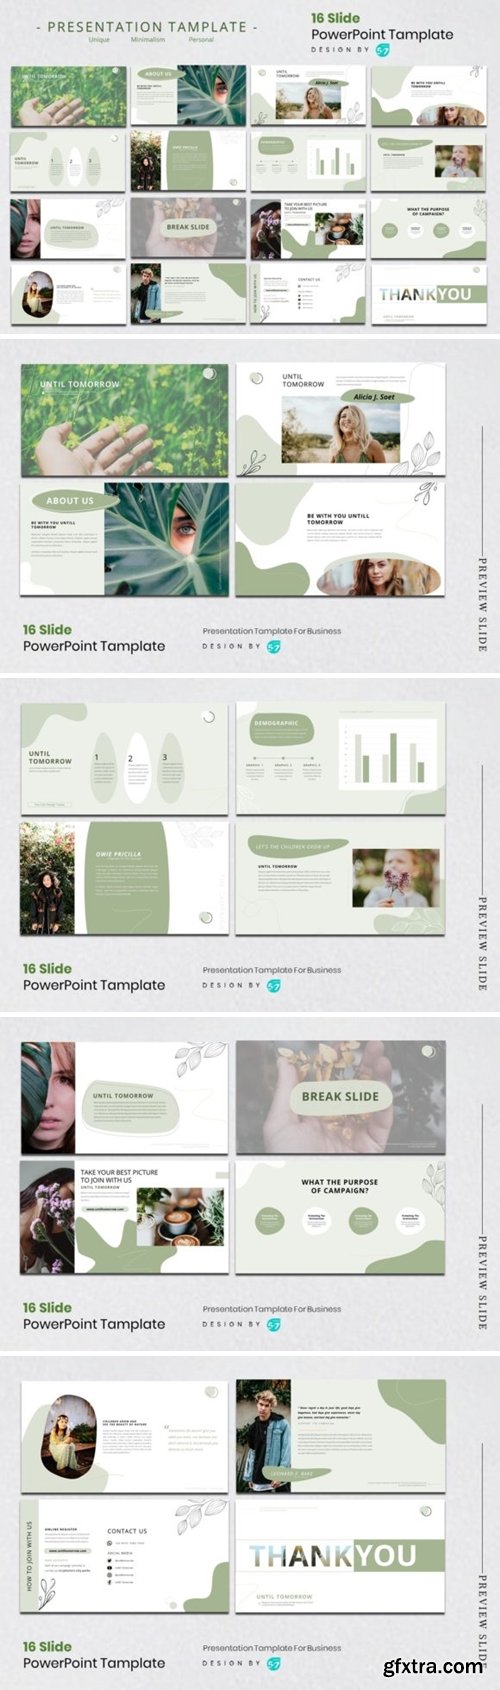 Presentation Tamplate - Green Themes 4116721